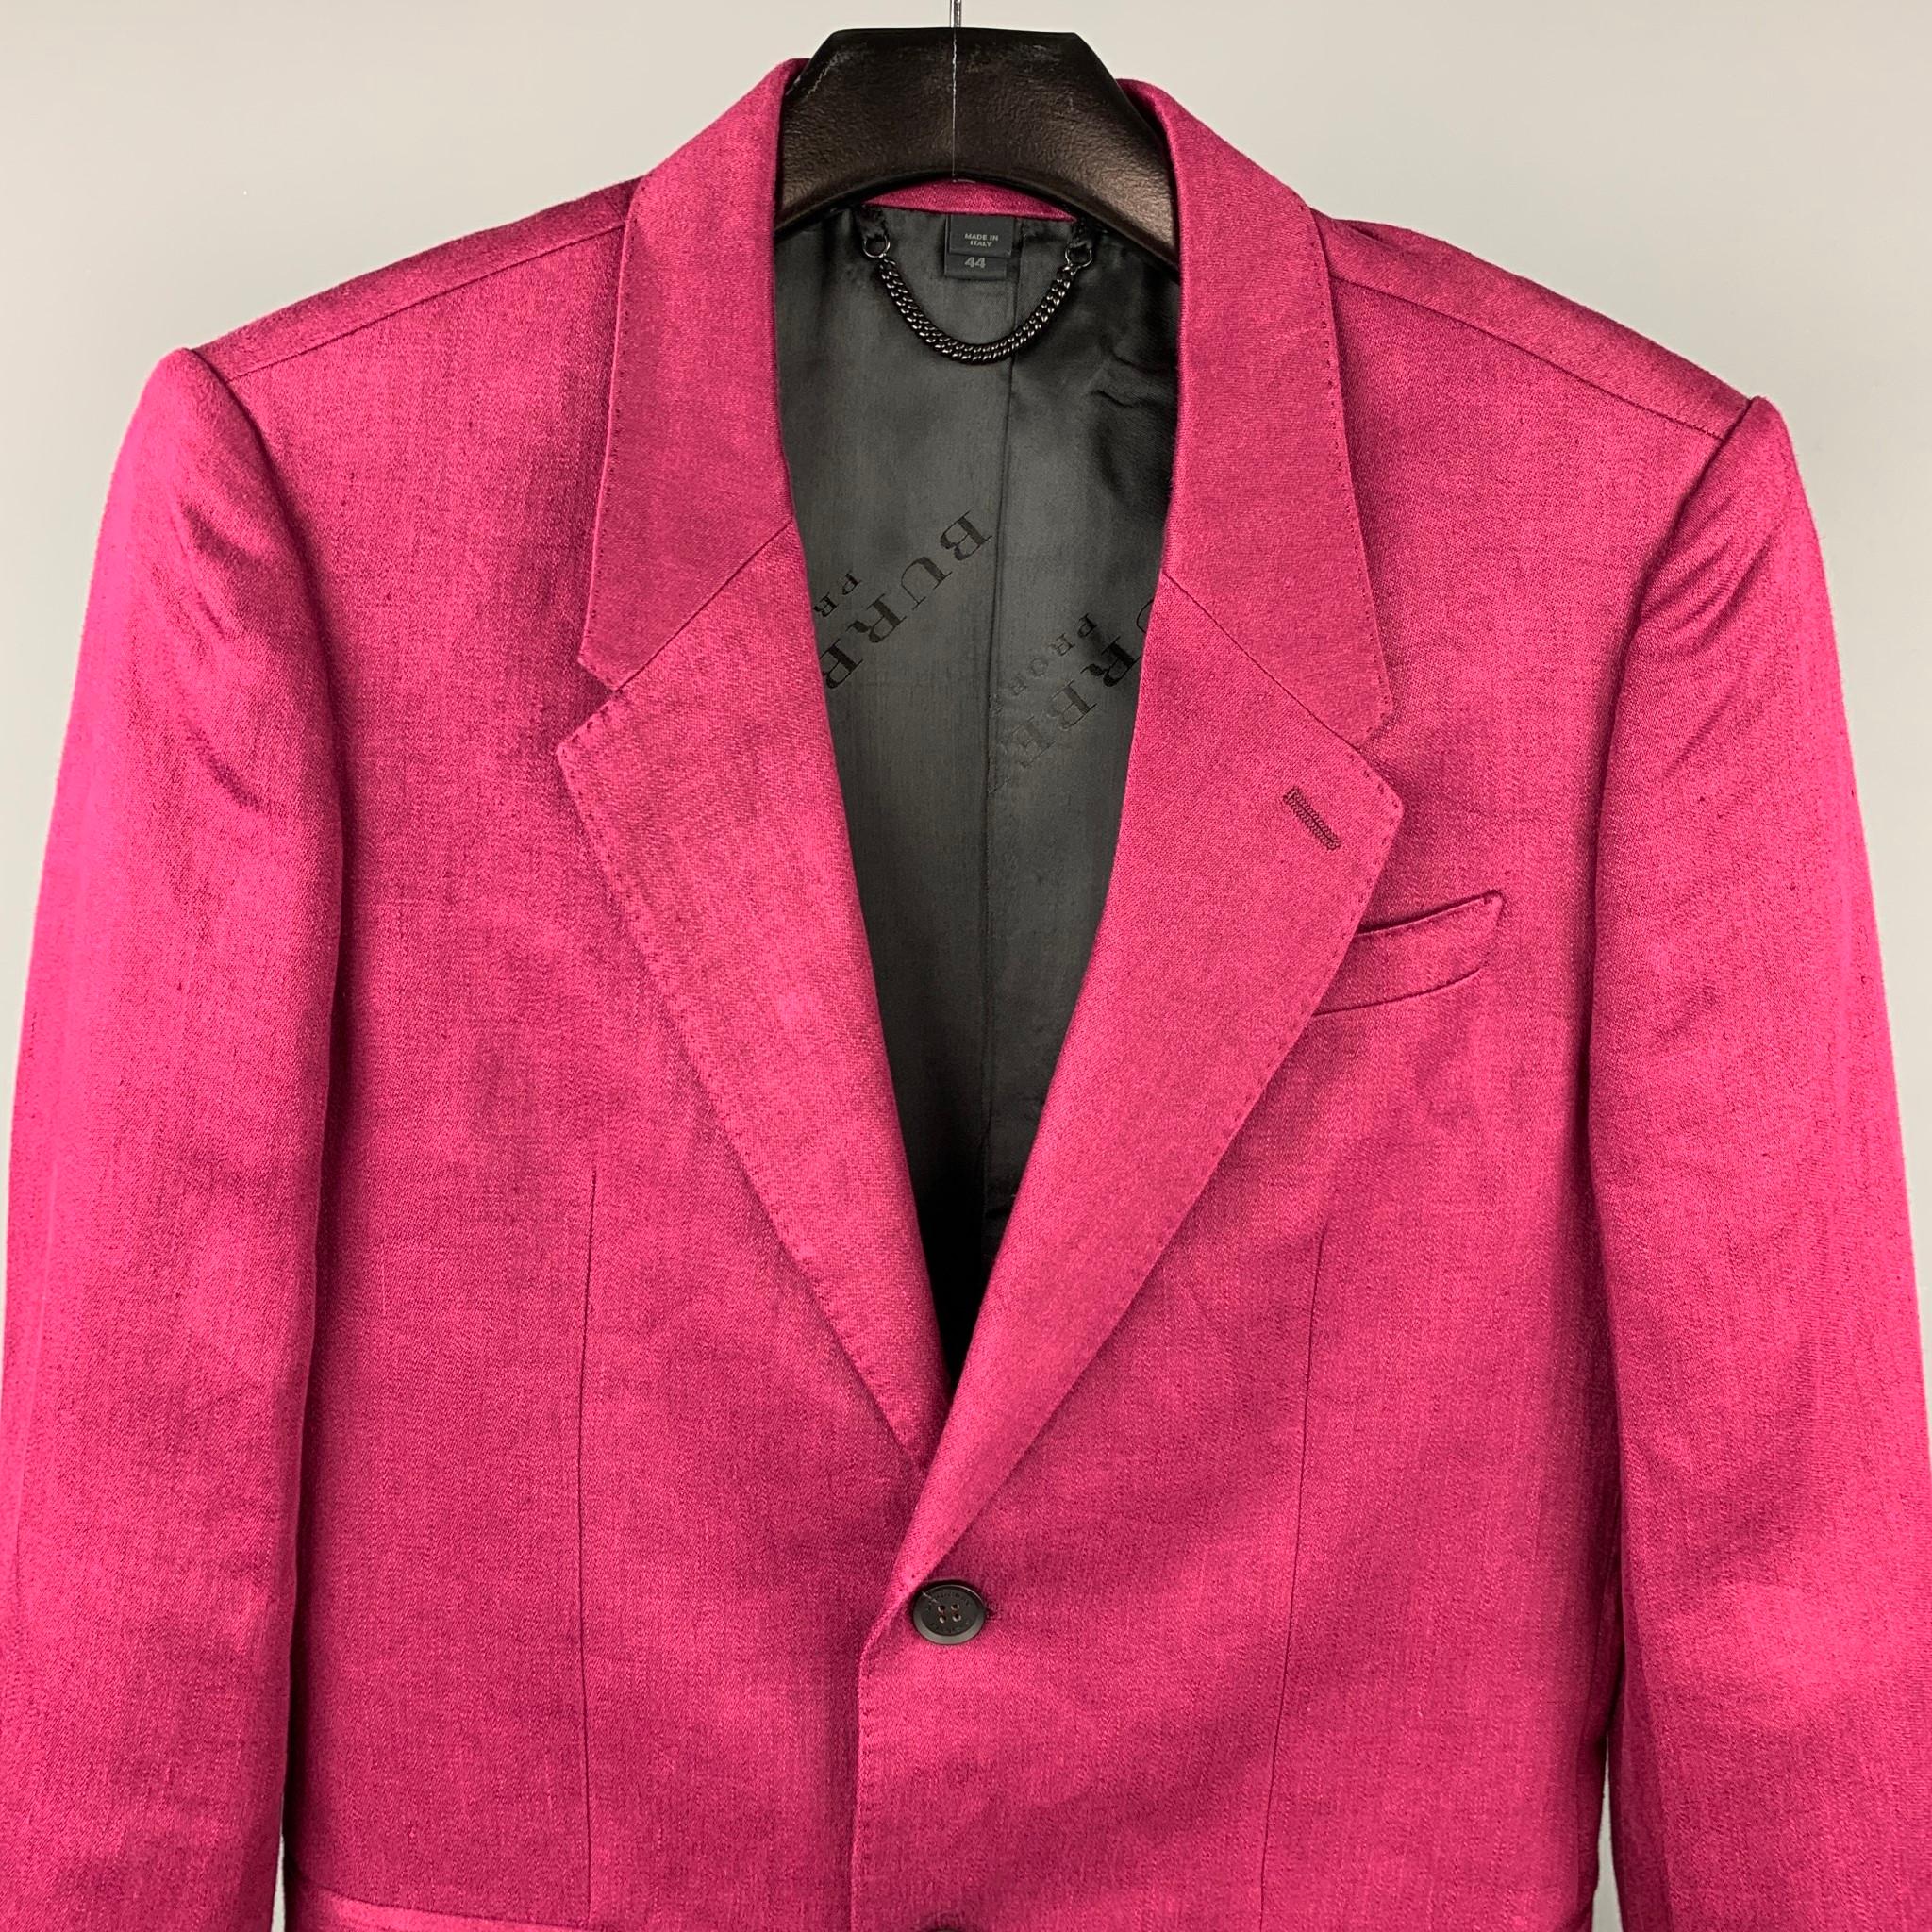 BURBERRY PRORSUM S/S 15 suit comes in a burgundy line with a full monogram print liner and includes a single breasted, two button sport coat with a notch lapel and matching flat front trousers. Made in Italy.

Very Good Pre-Owned Condition.
Marked: